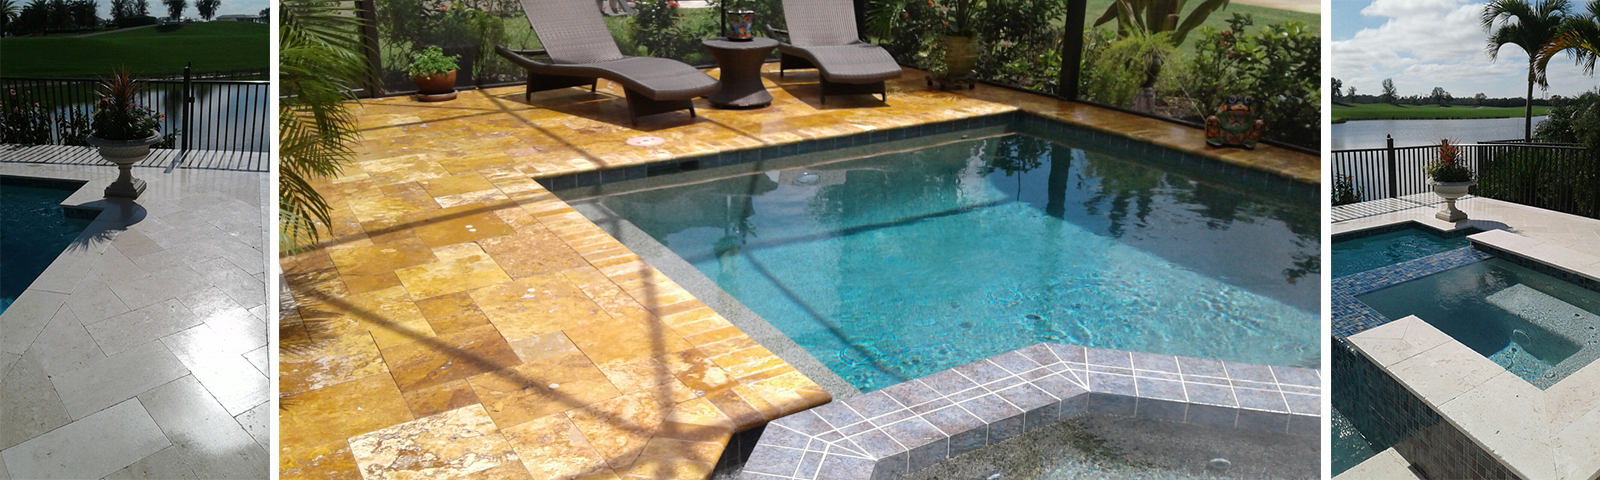 Travertine we pressure washed by a pool